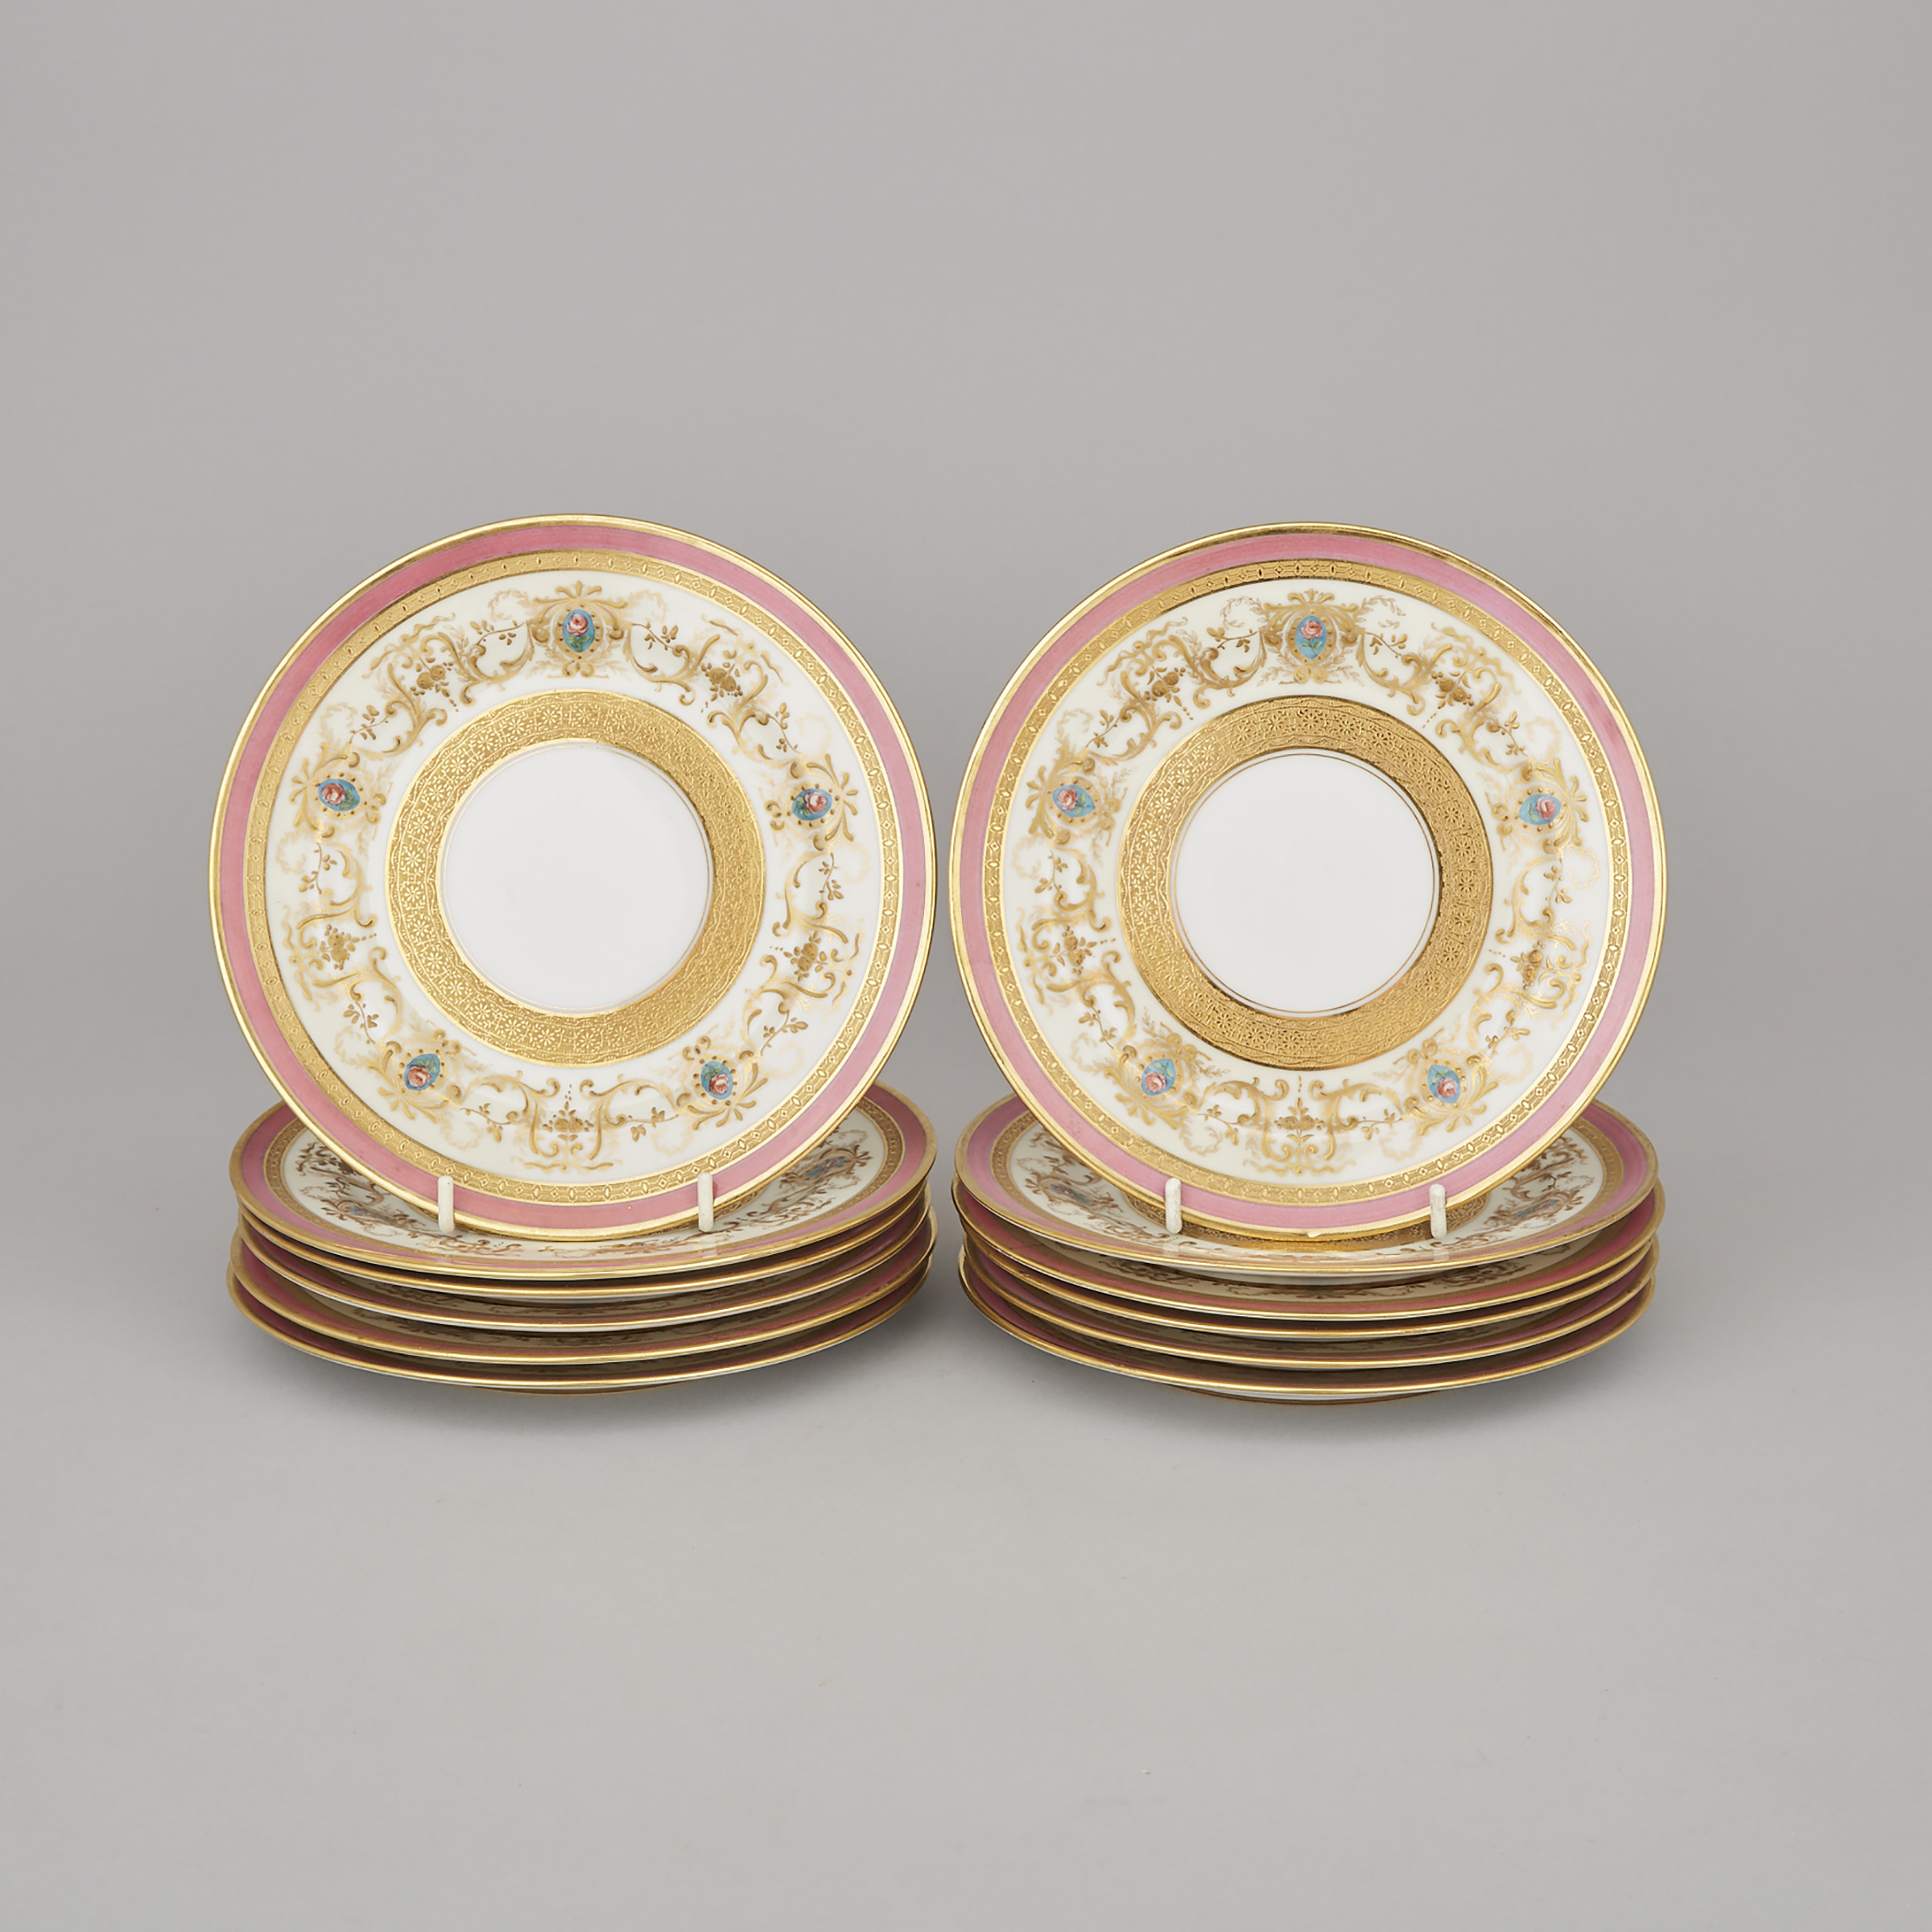 Twelve Charles Ahrenfeldt, Limoges Floral and Gilt Decorated and Pink Bordered Dessert Plates, 20th century